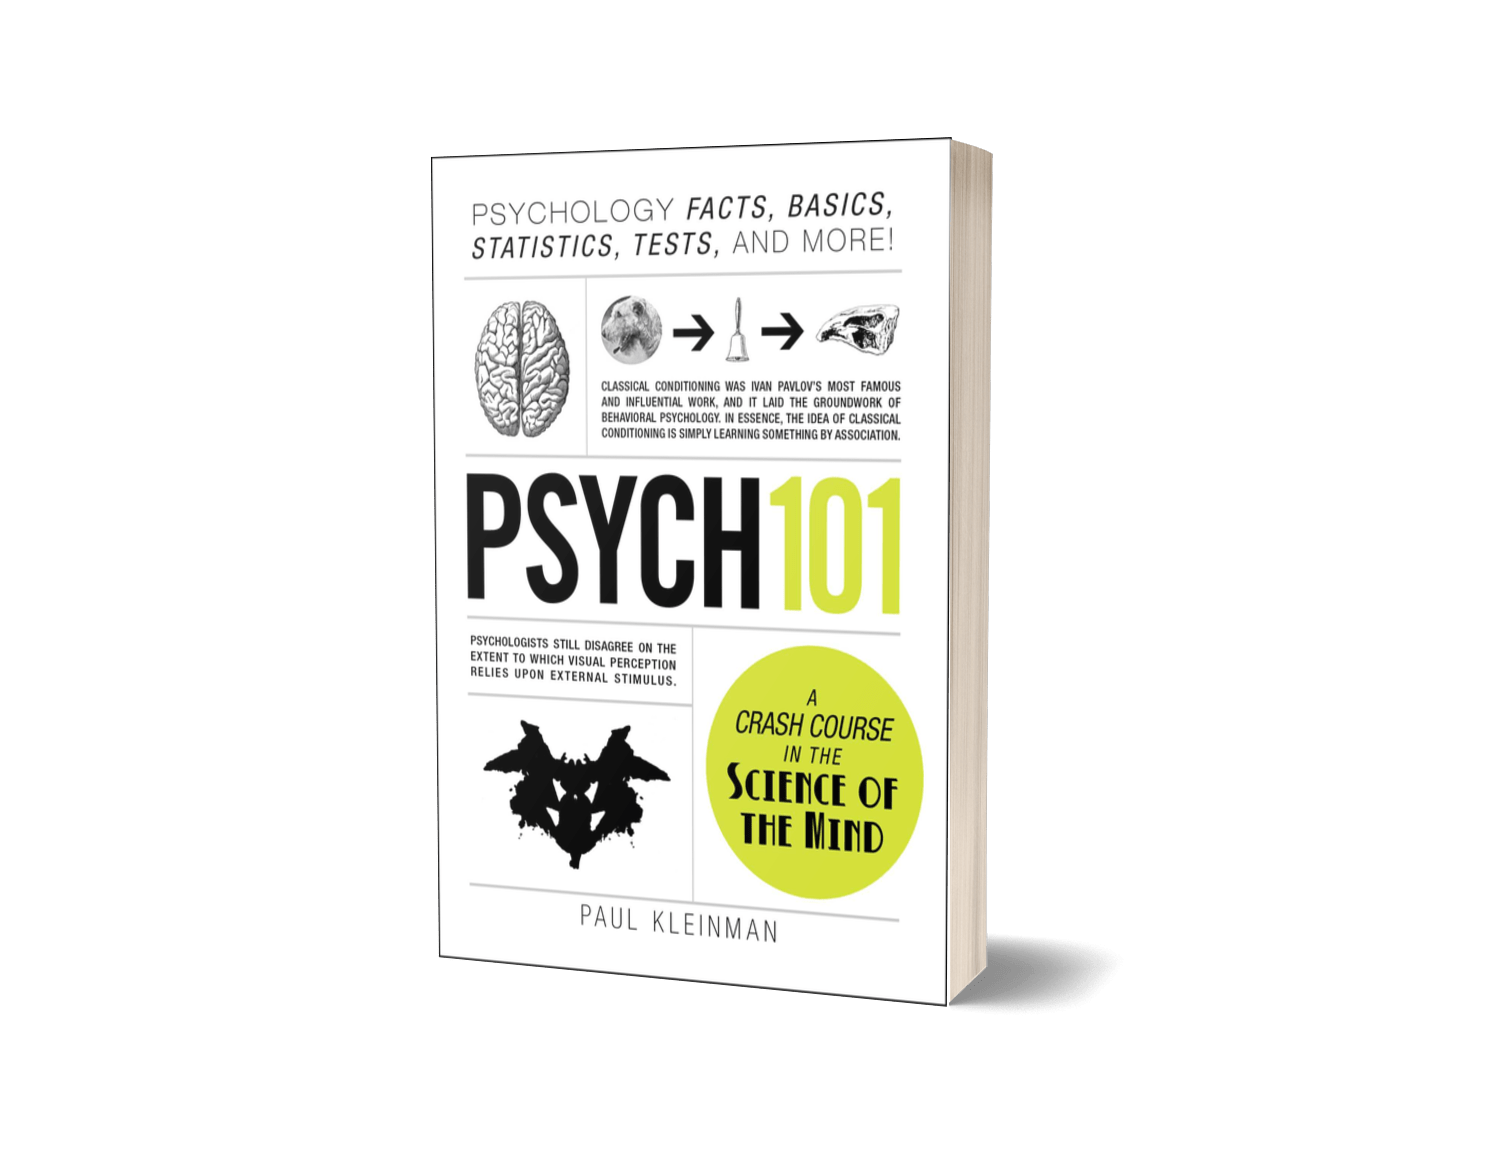 Psych 101 Psychology Facts, Basics, Statistics, Tests, and More!